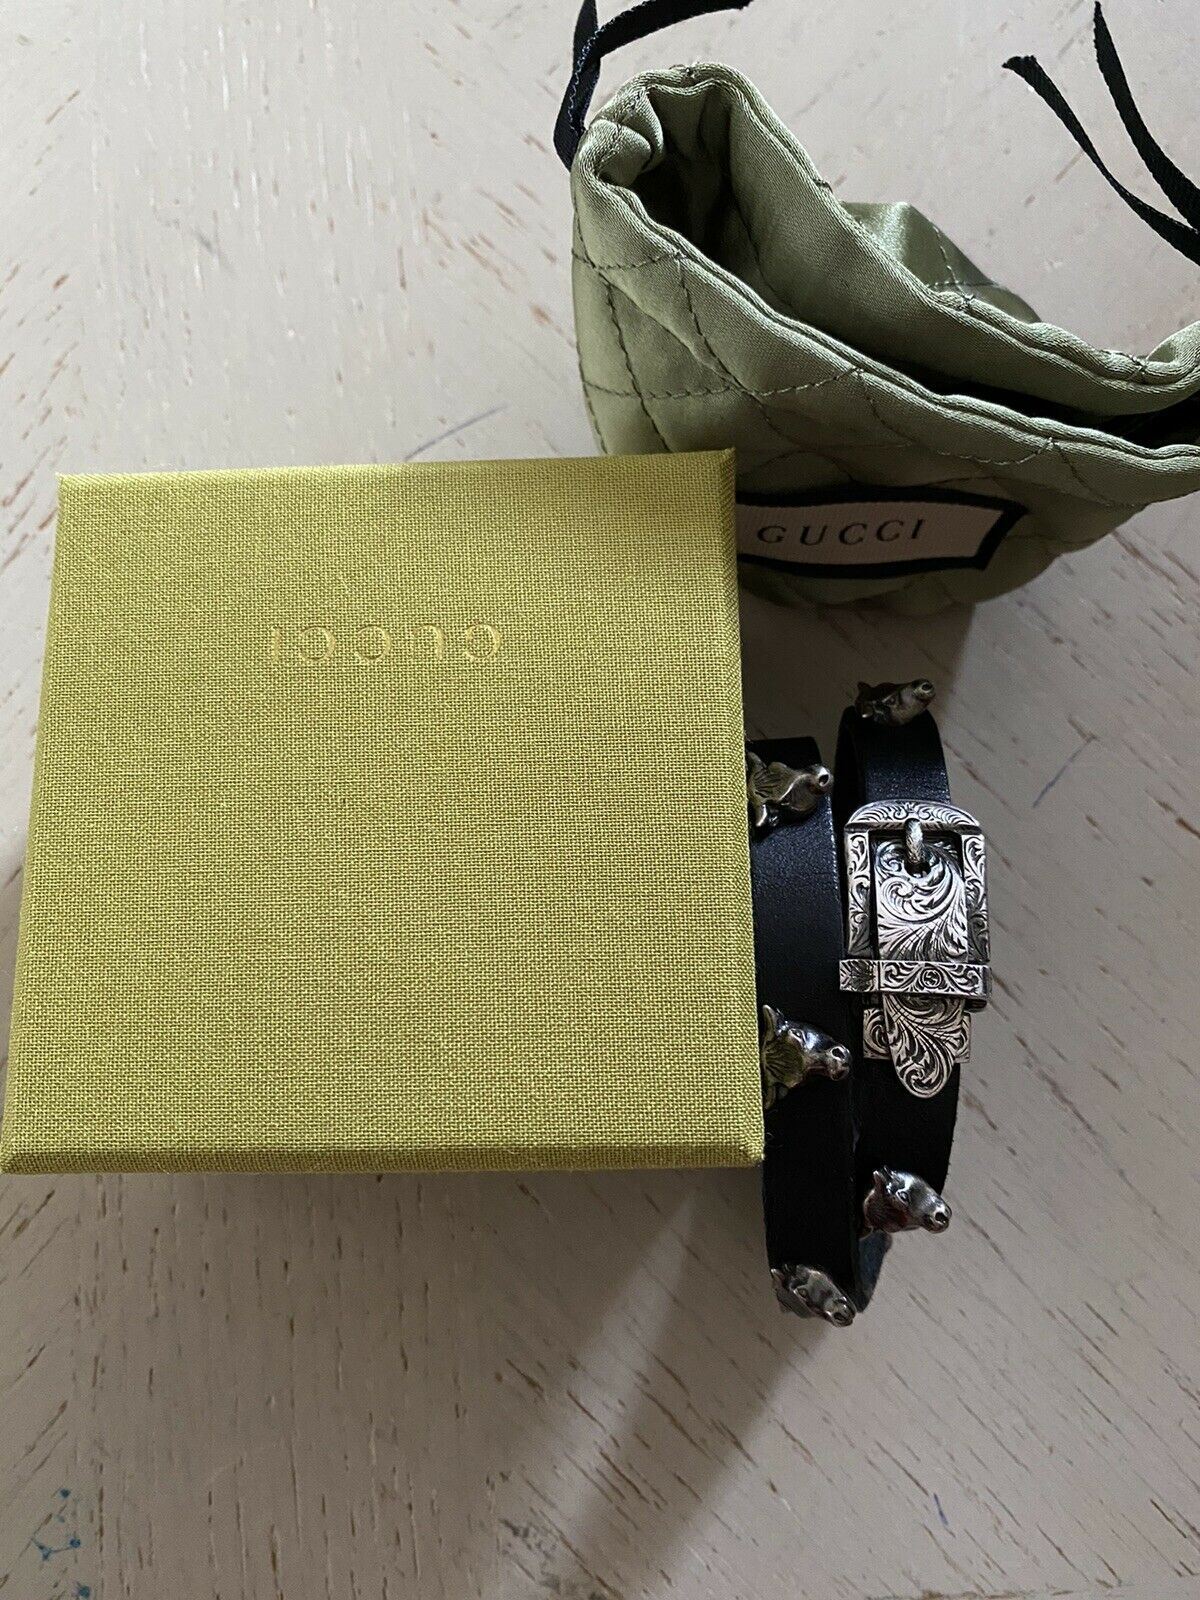 NWT $950 GUCCI Anger Forest Bull Head Leather Bracelet 925 Silver Black Sz 17